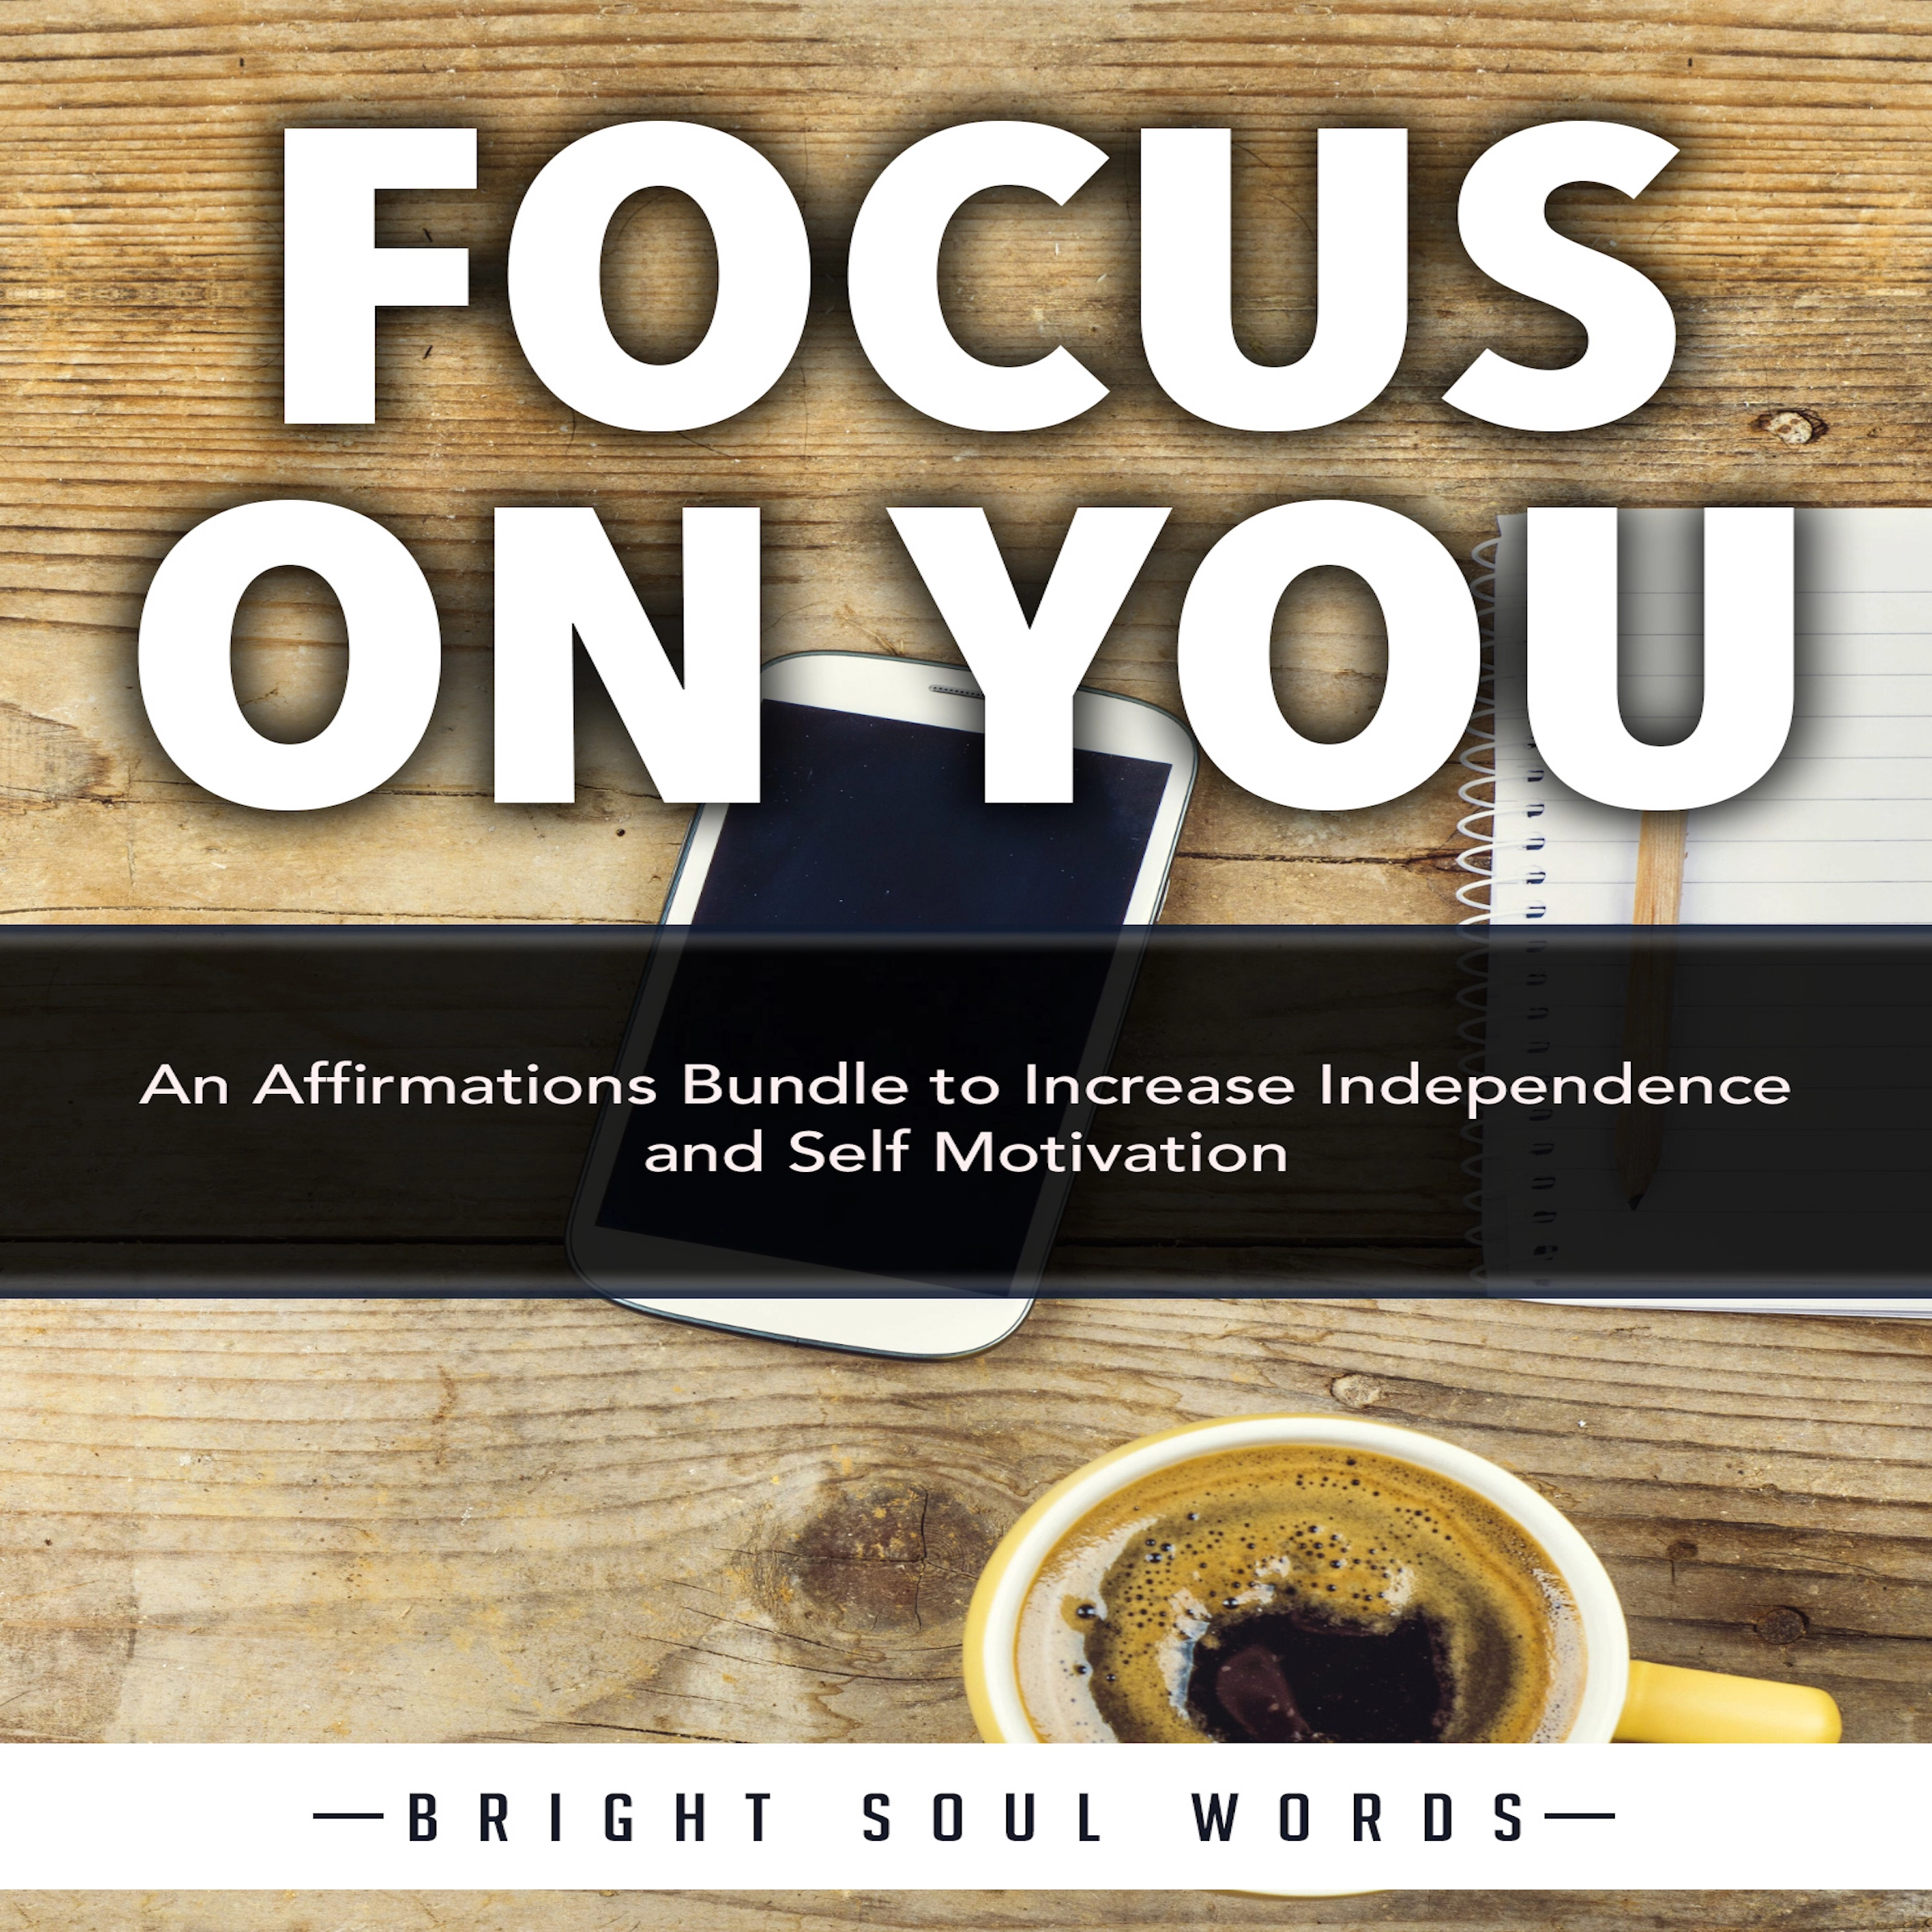 Focus on You: An Affirmations Bundle to Increase Independence and Self Motivation Audiobook by Bright Soul Words